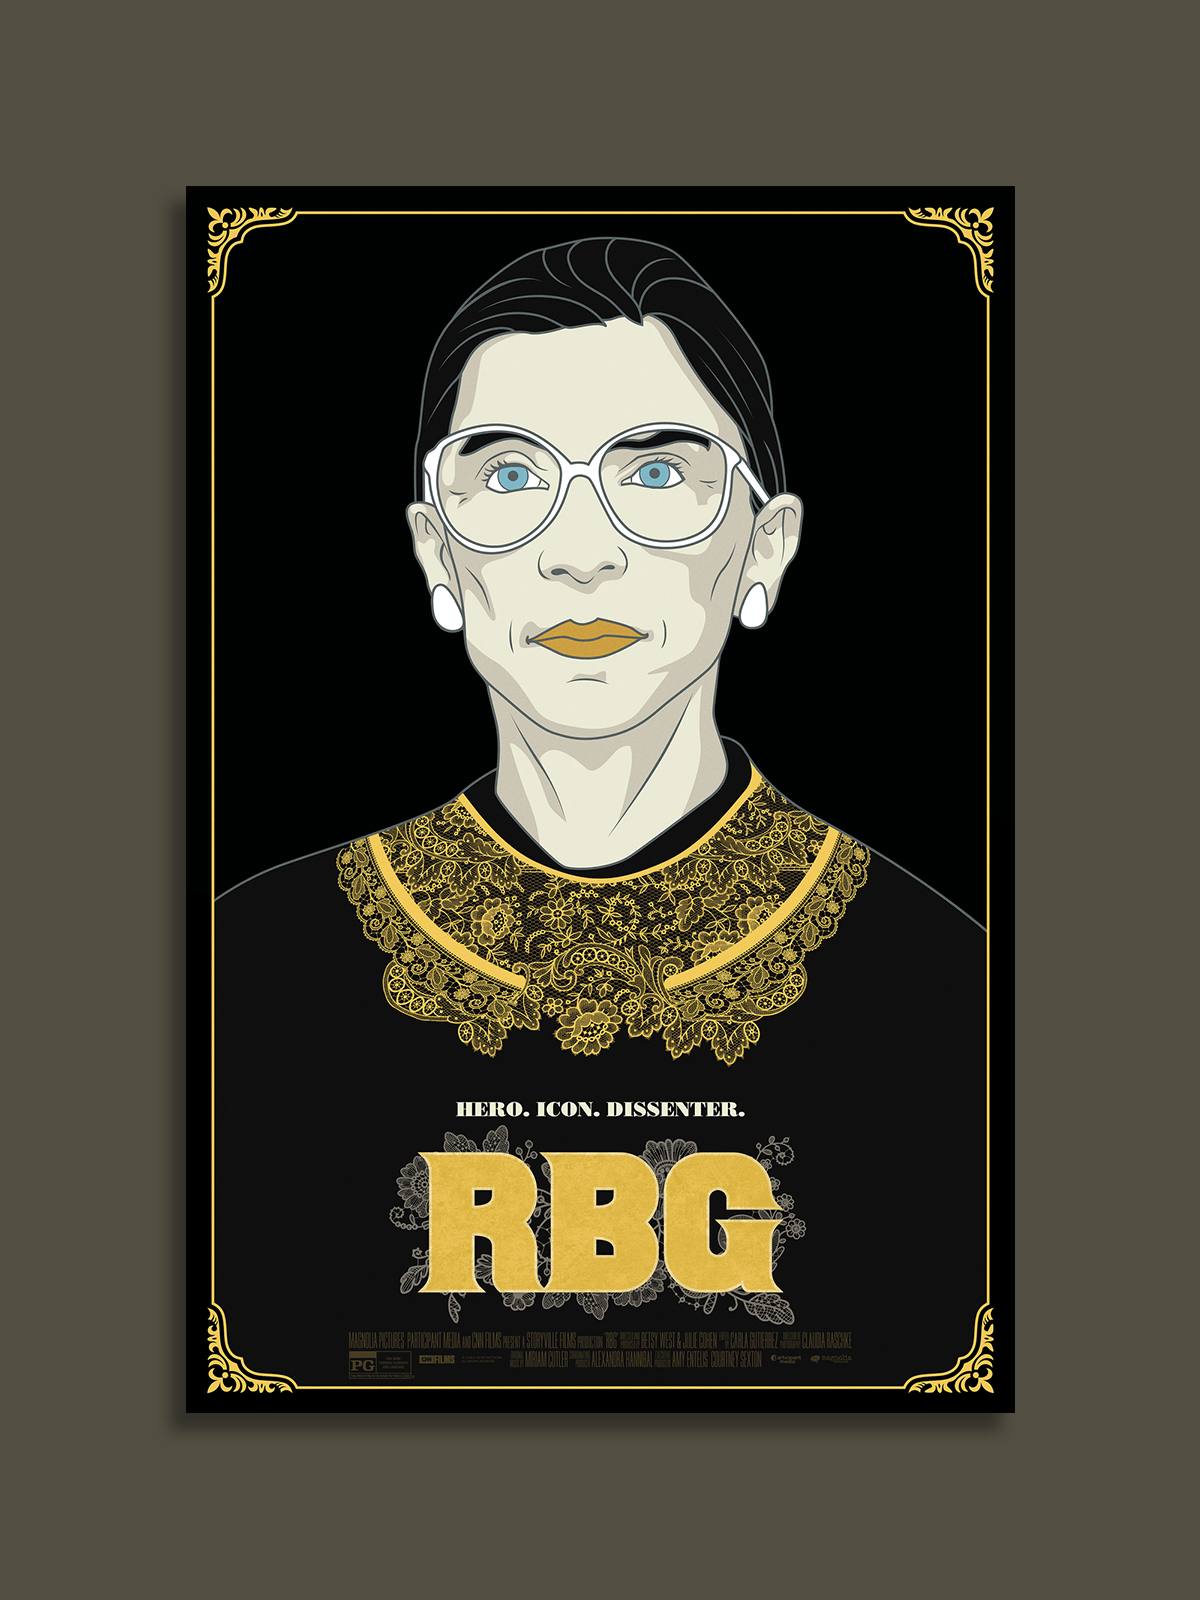 RBG How did Justice Ruth Bader Ginsburg go from courtroom boss to pop culture icon? Her signature mix of wit, no BS and sharp intellect make her a role model for every girl and the coolest 85 year old on the planet. This film tells the story of her rise to the Supreme Court. When I grow up, I want to be RBG.